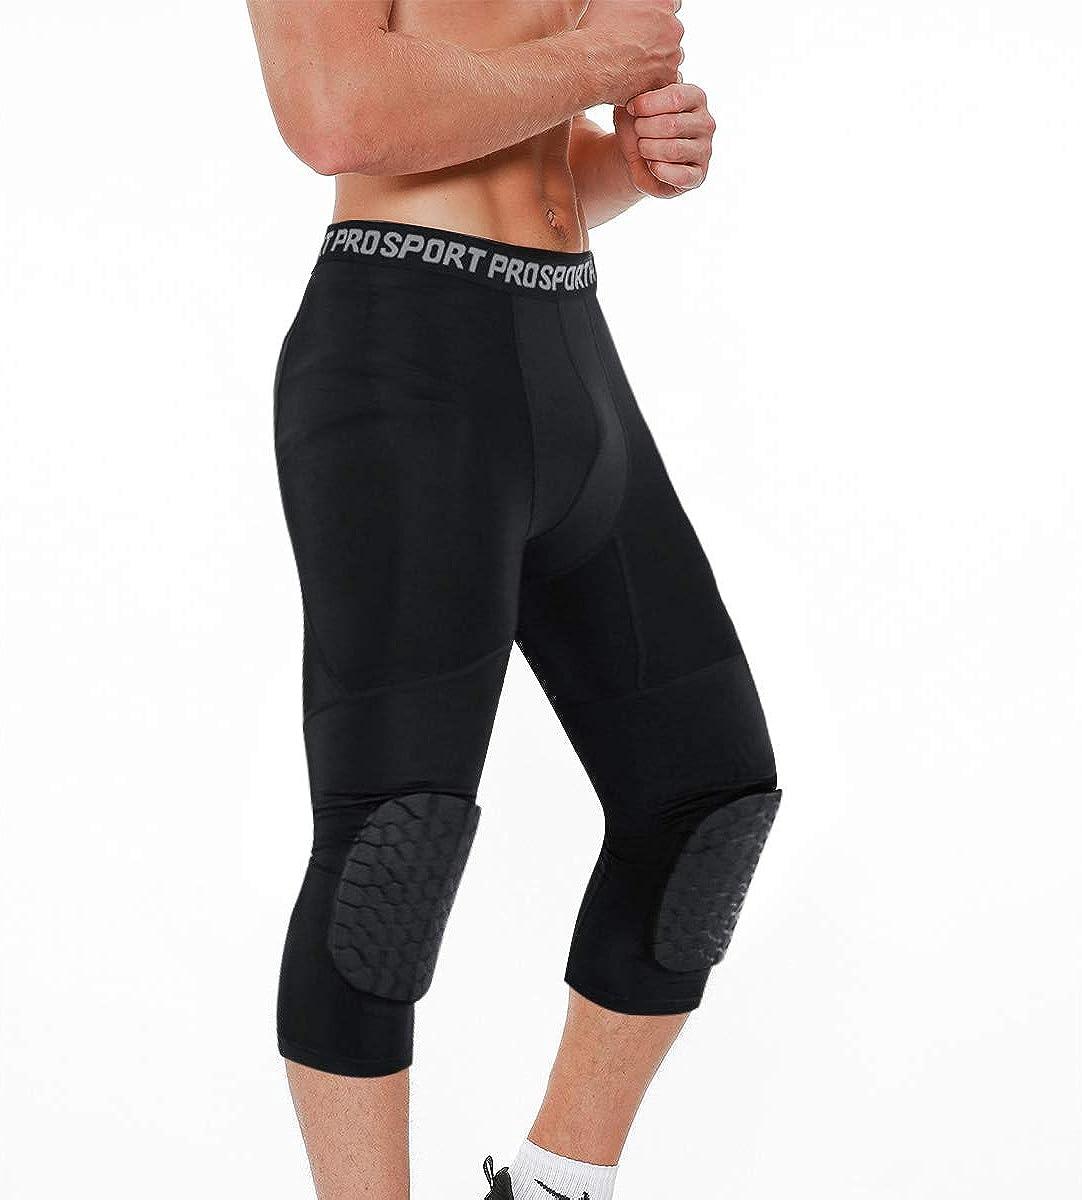 TUOY Men's Padded Compression Pants Quick Drying Tight Protective